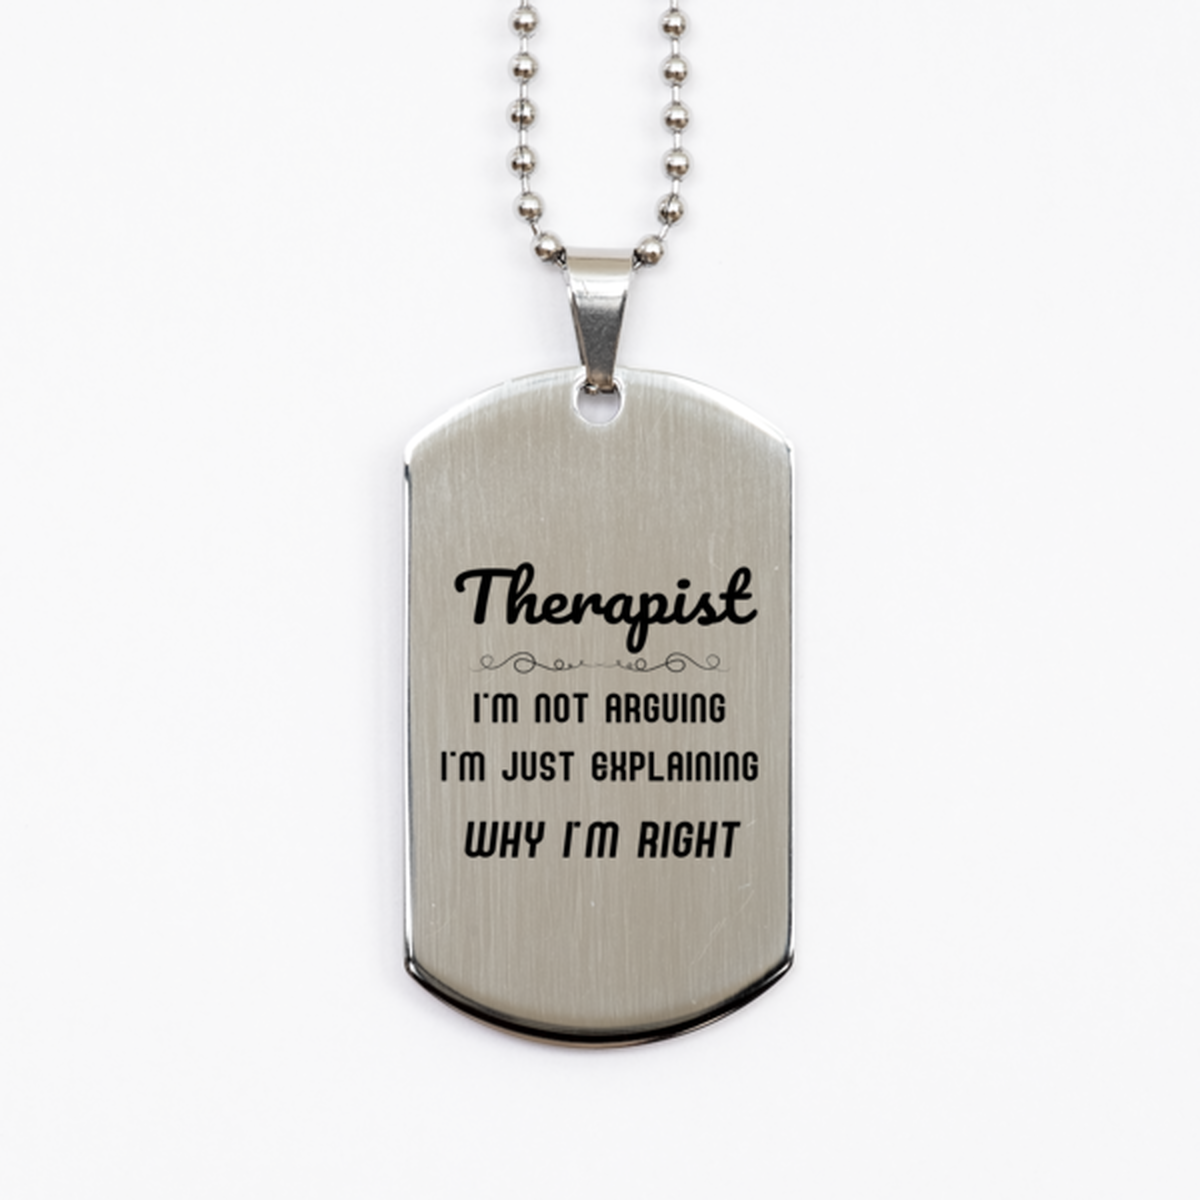 Therapist I'm not Arguing. I'm Just Explaining Why I'm RIGHT Silver Dog Tag, Funny Saying Quote Therapist Gifts For Therapist Graduation Birthday Christmas Gifts for Men Women Coworker